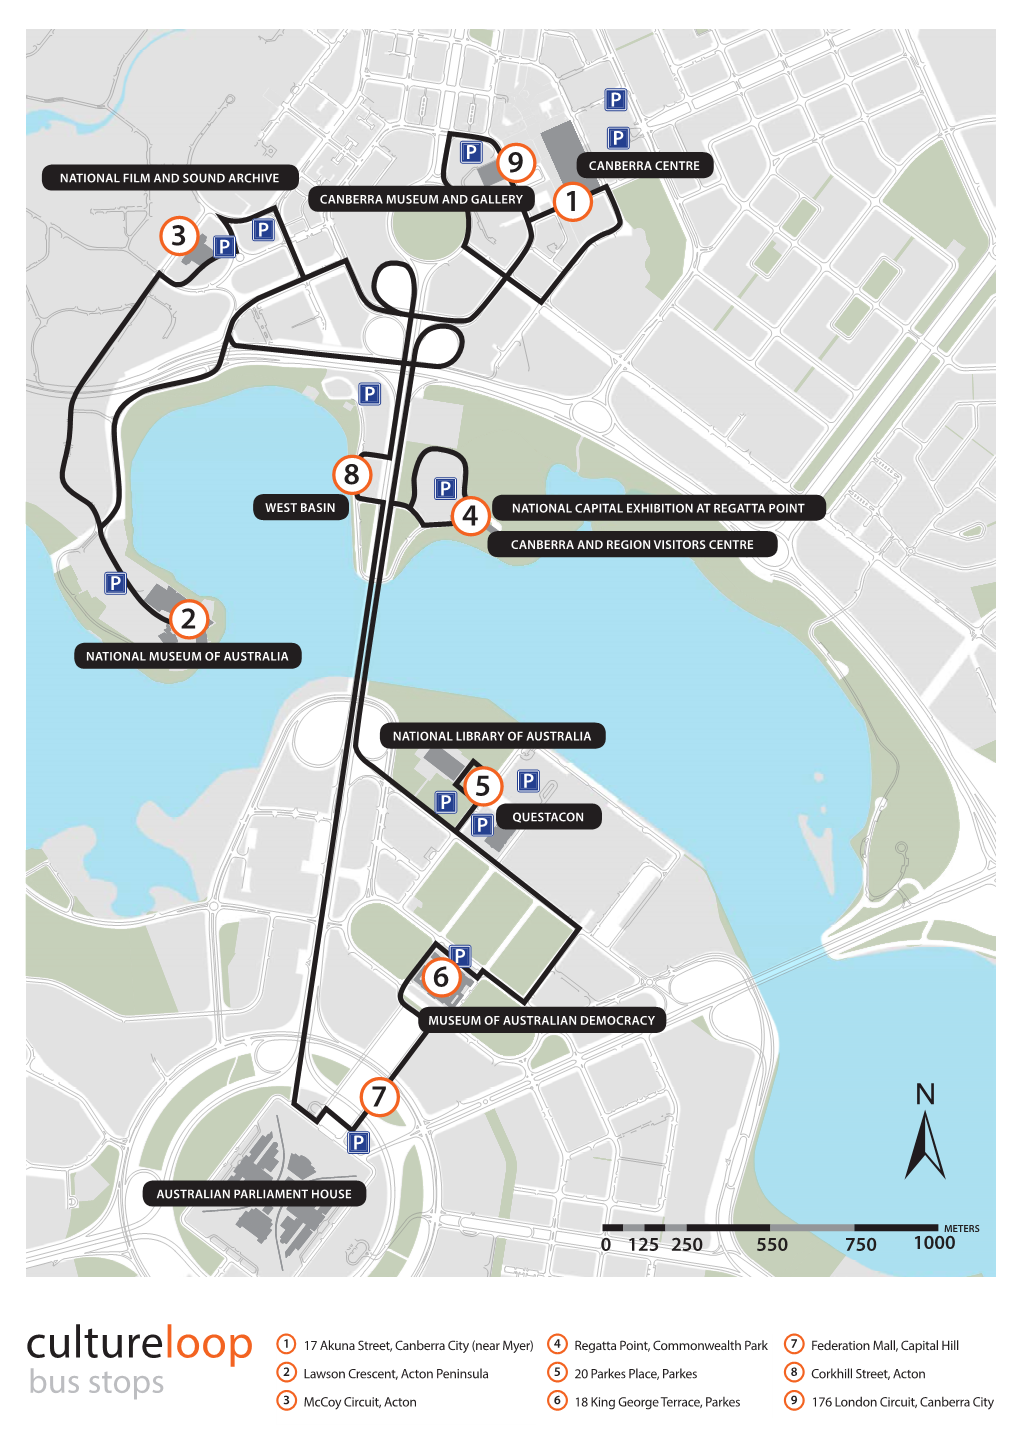 Culture Loop Shuttle Bus Map and Timetable